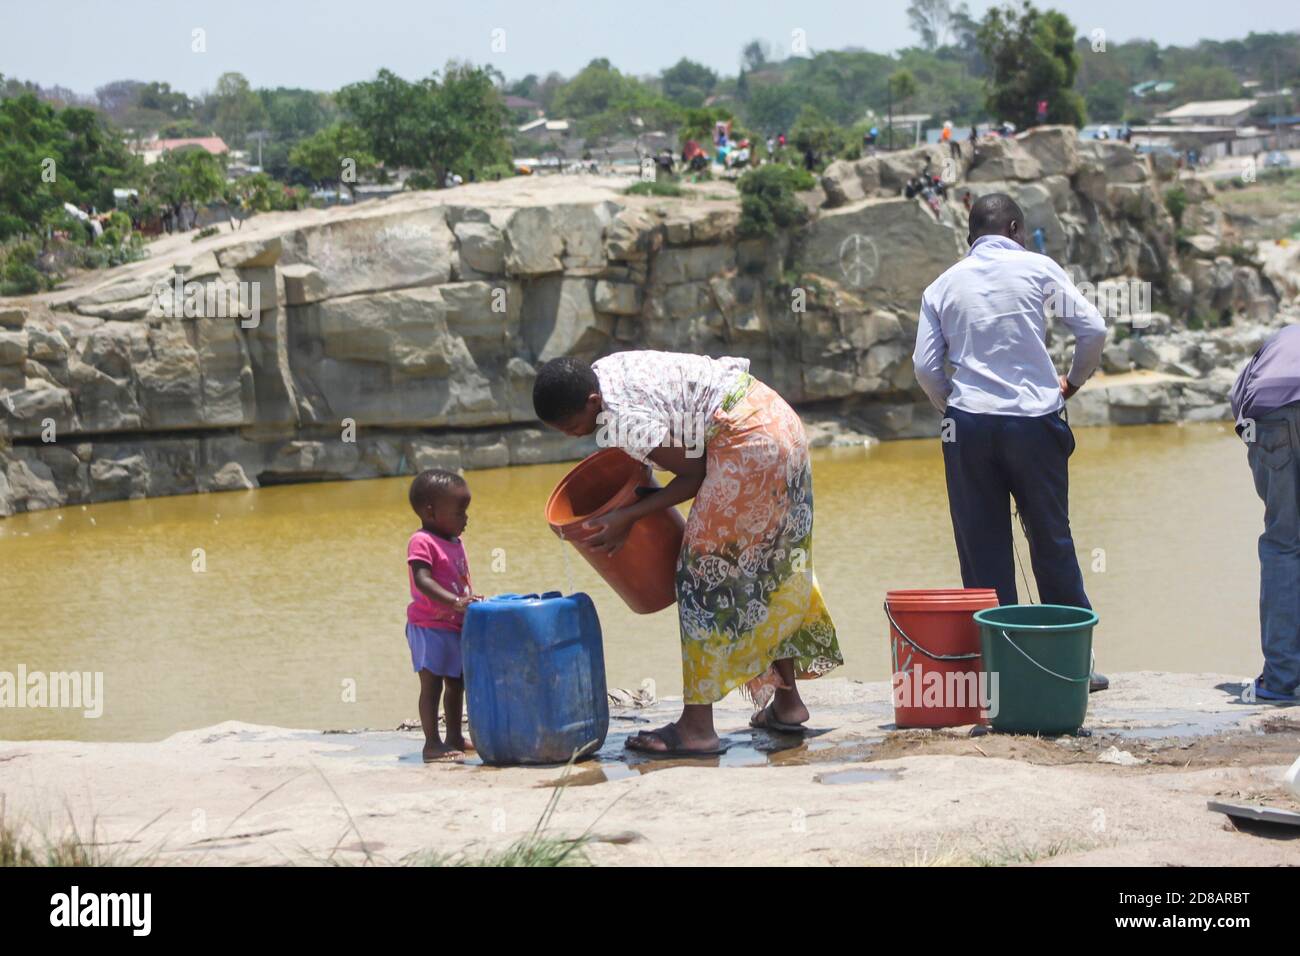 A woman with her child fetches water from an unprotected dead pool. Despite the risk and dangers at the dead pool many residents still go and fetch water in dangerous area. Epworth is one of the areas without tap water. Zimbabwe. Stock Photo